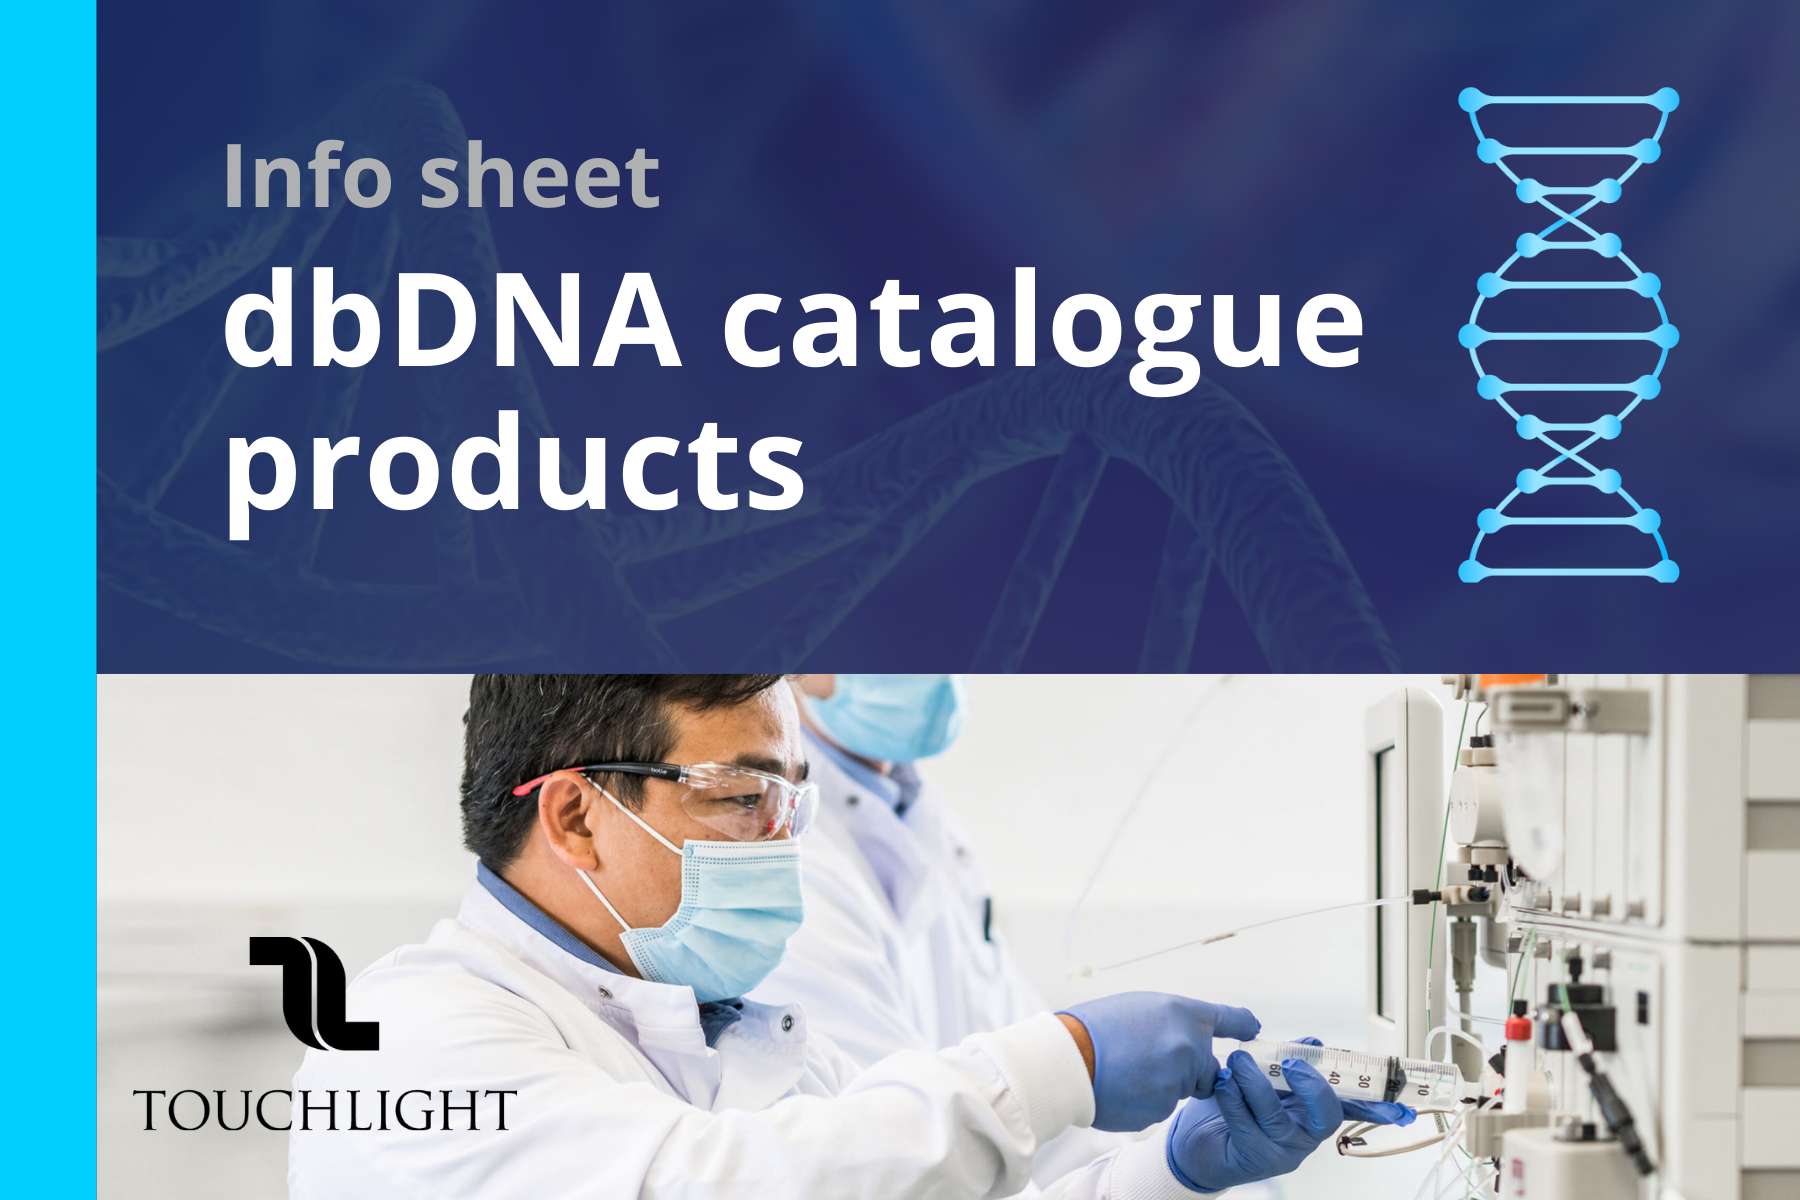 Info sheet – dbDNA catalogue products